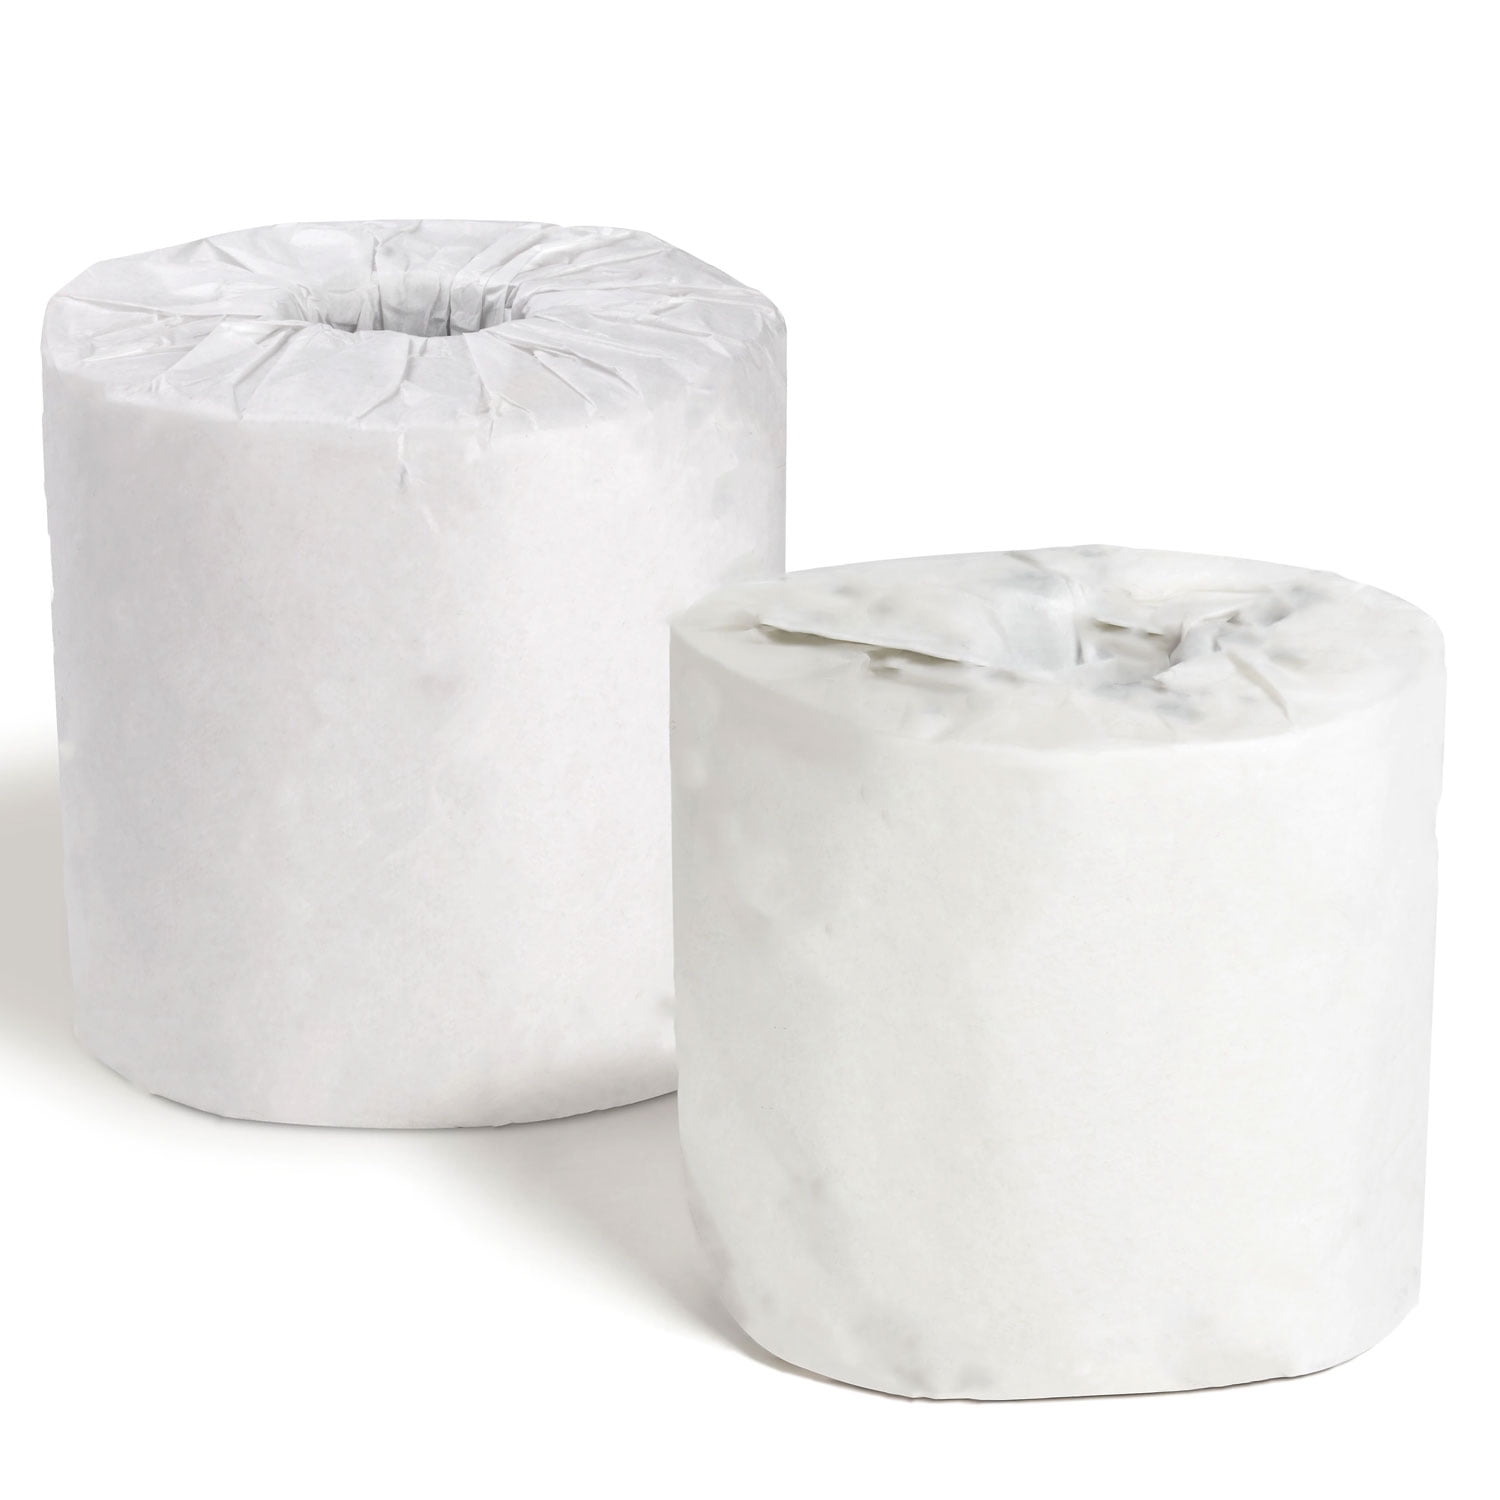 MyOfficeInnovations Recycled 2Ply Standard Toilet Paper White 350 Sheets/Roll